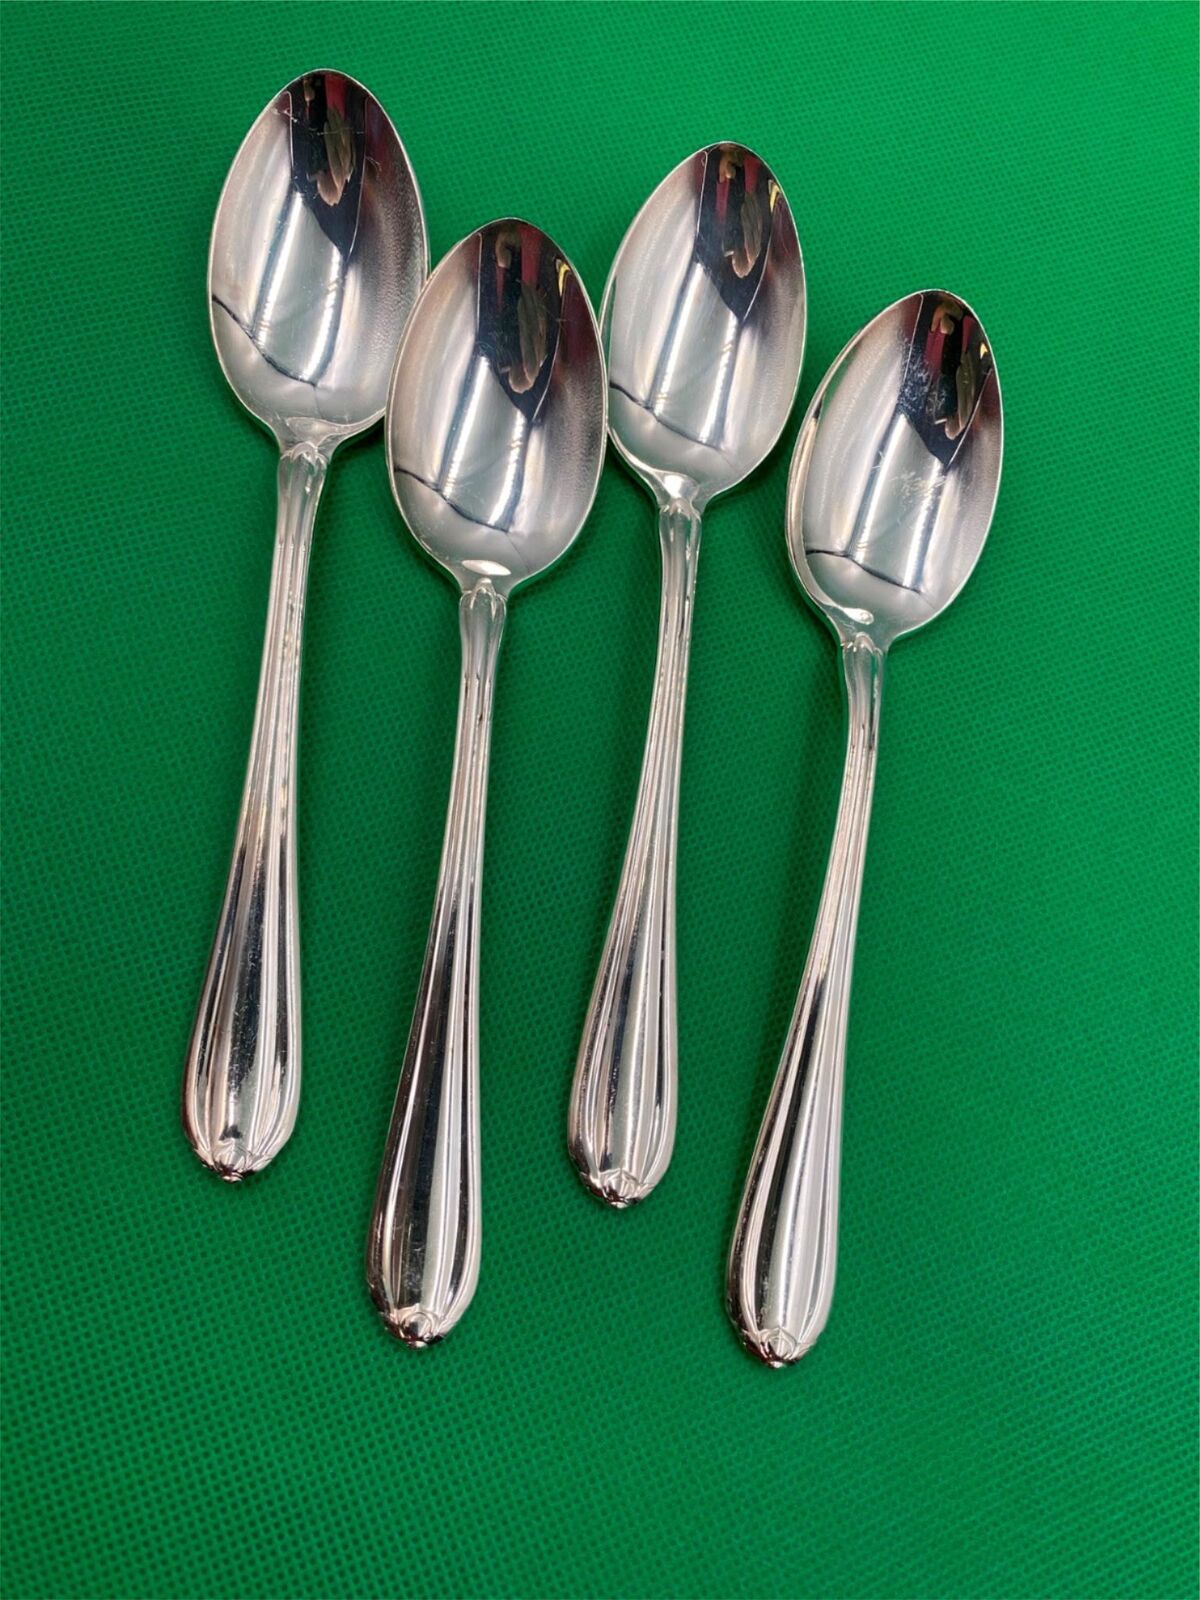 Set of 4 Gorham Silverplate MELON BUD Oval Soup / Place Spoons